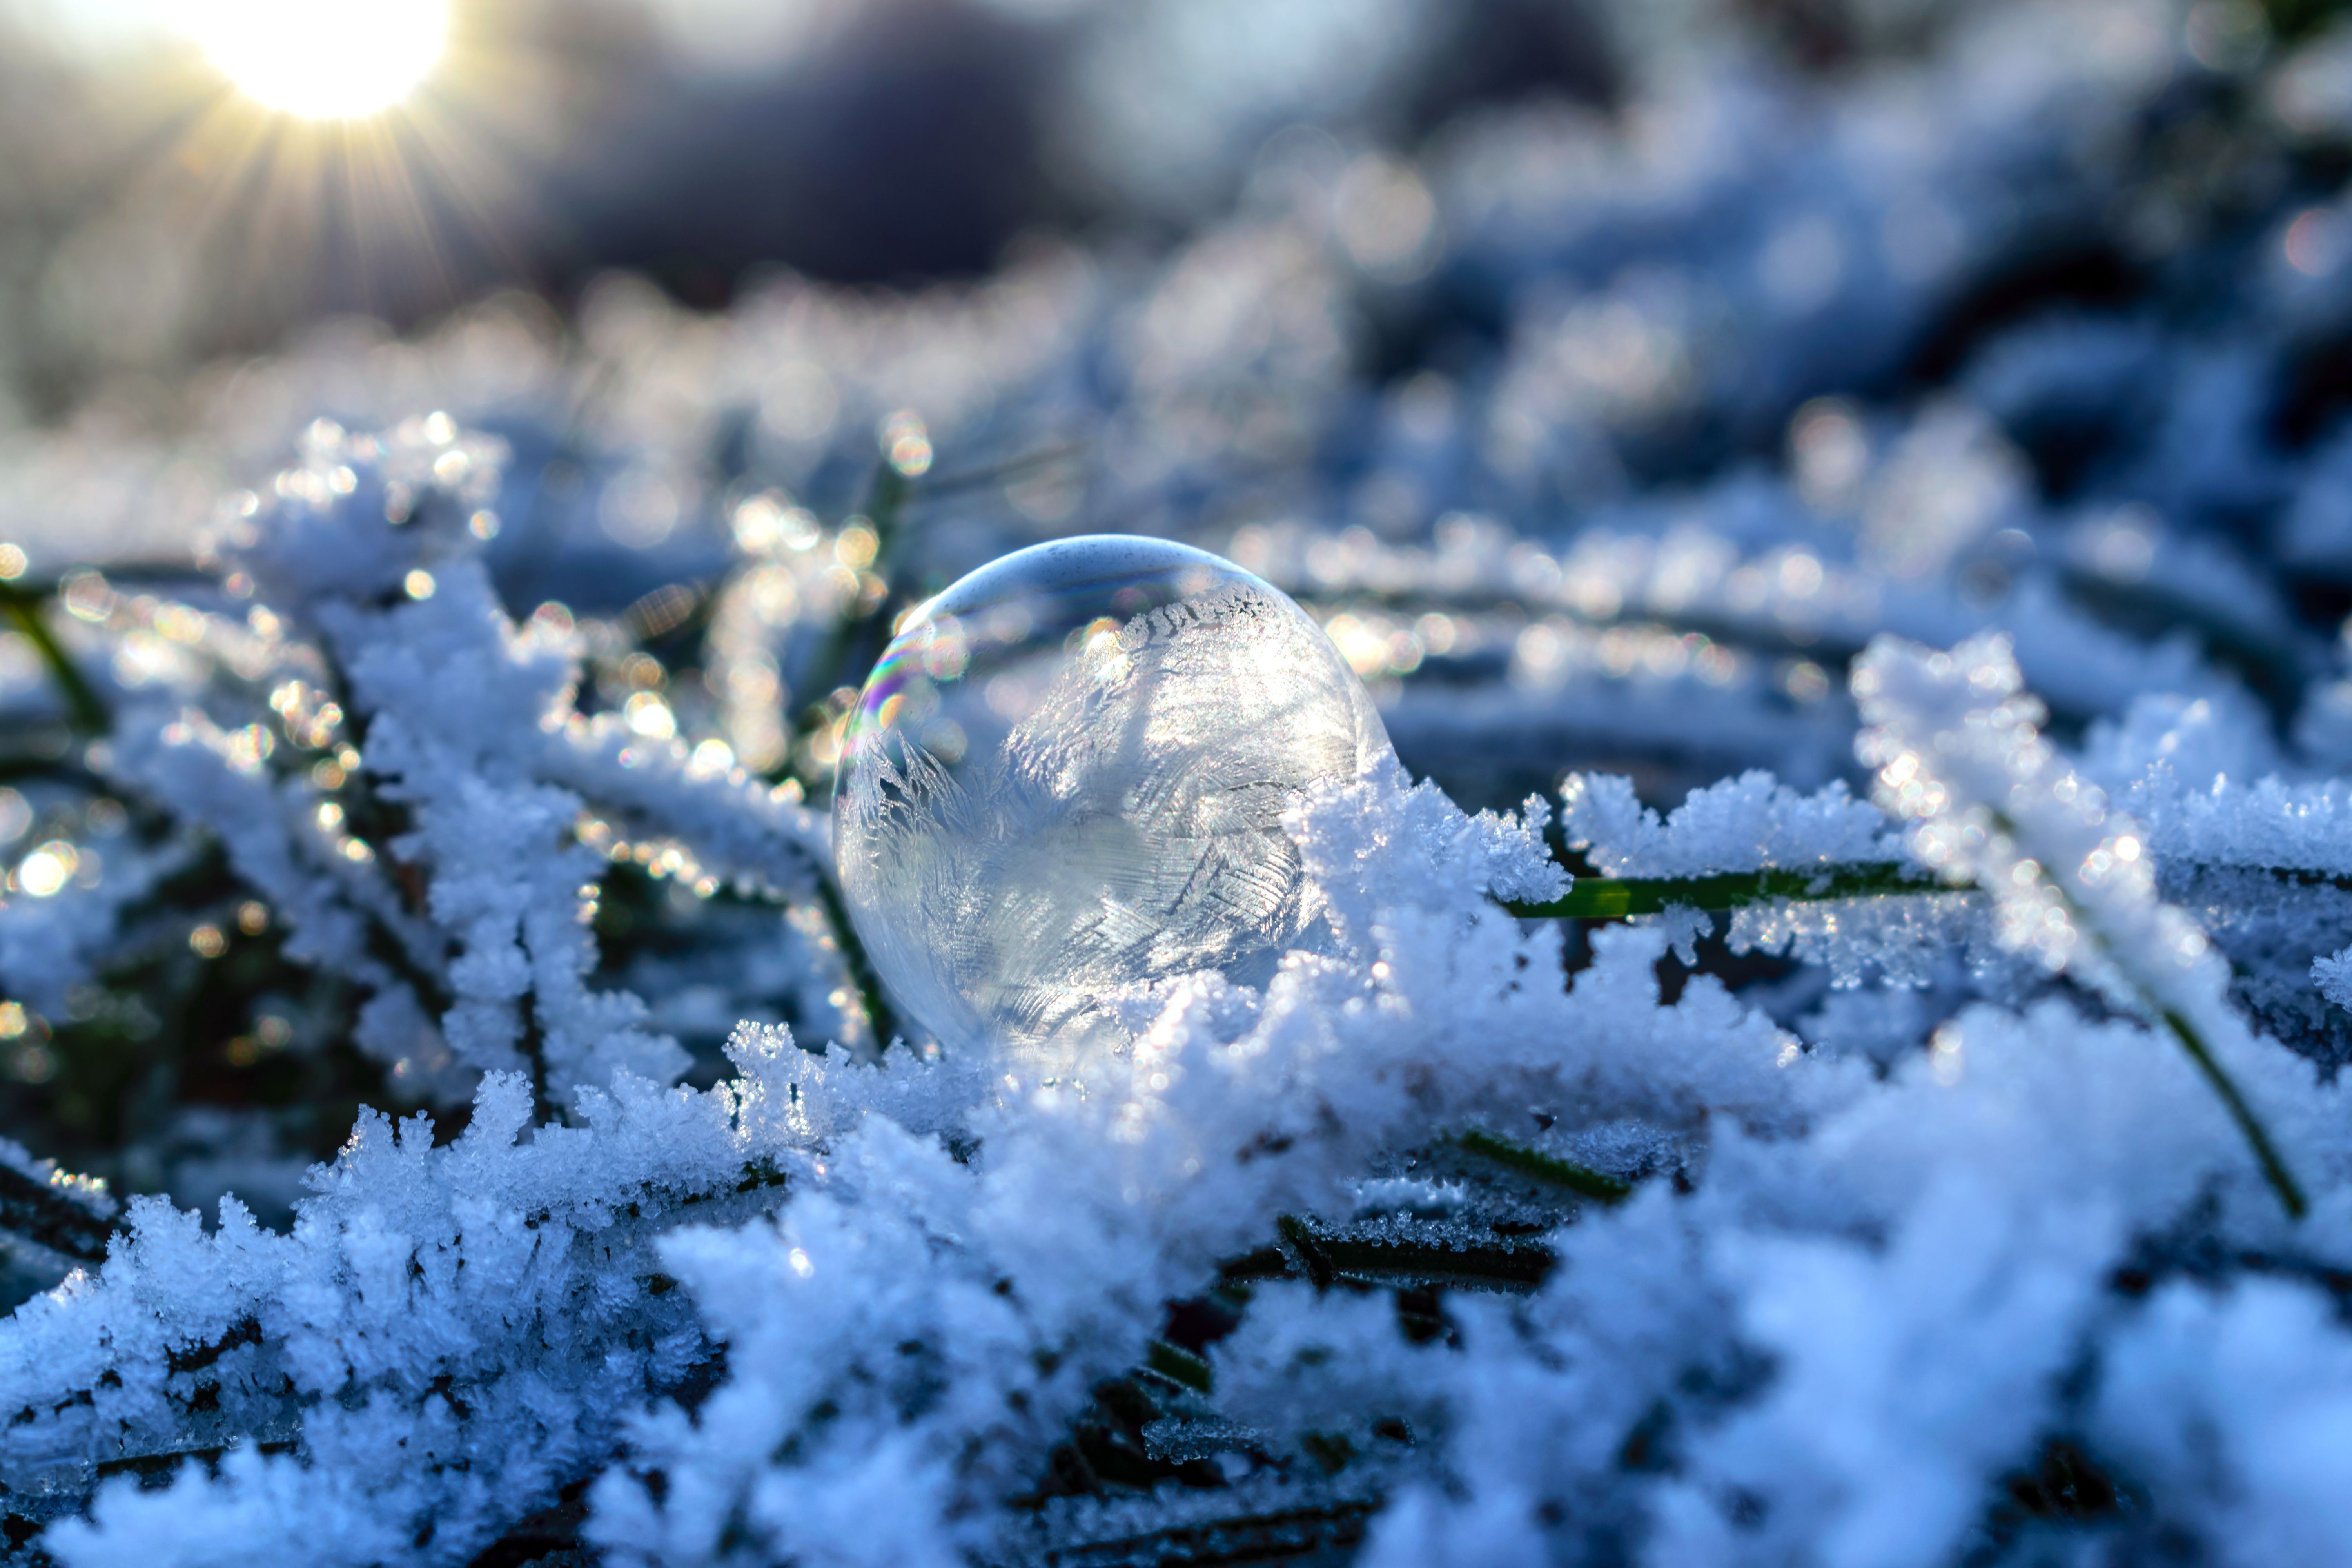 Download wallpaper 6000x4000 bubble, orb, frost, snow HD background